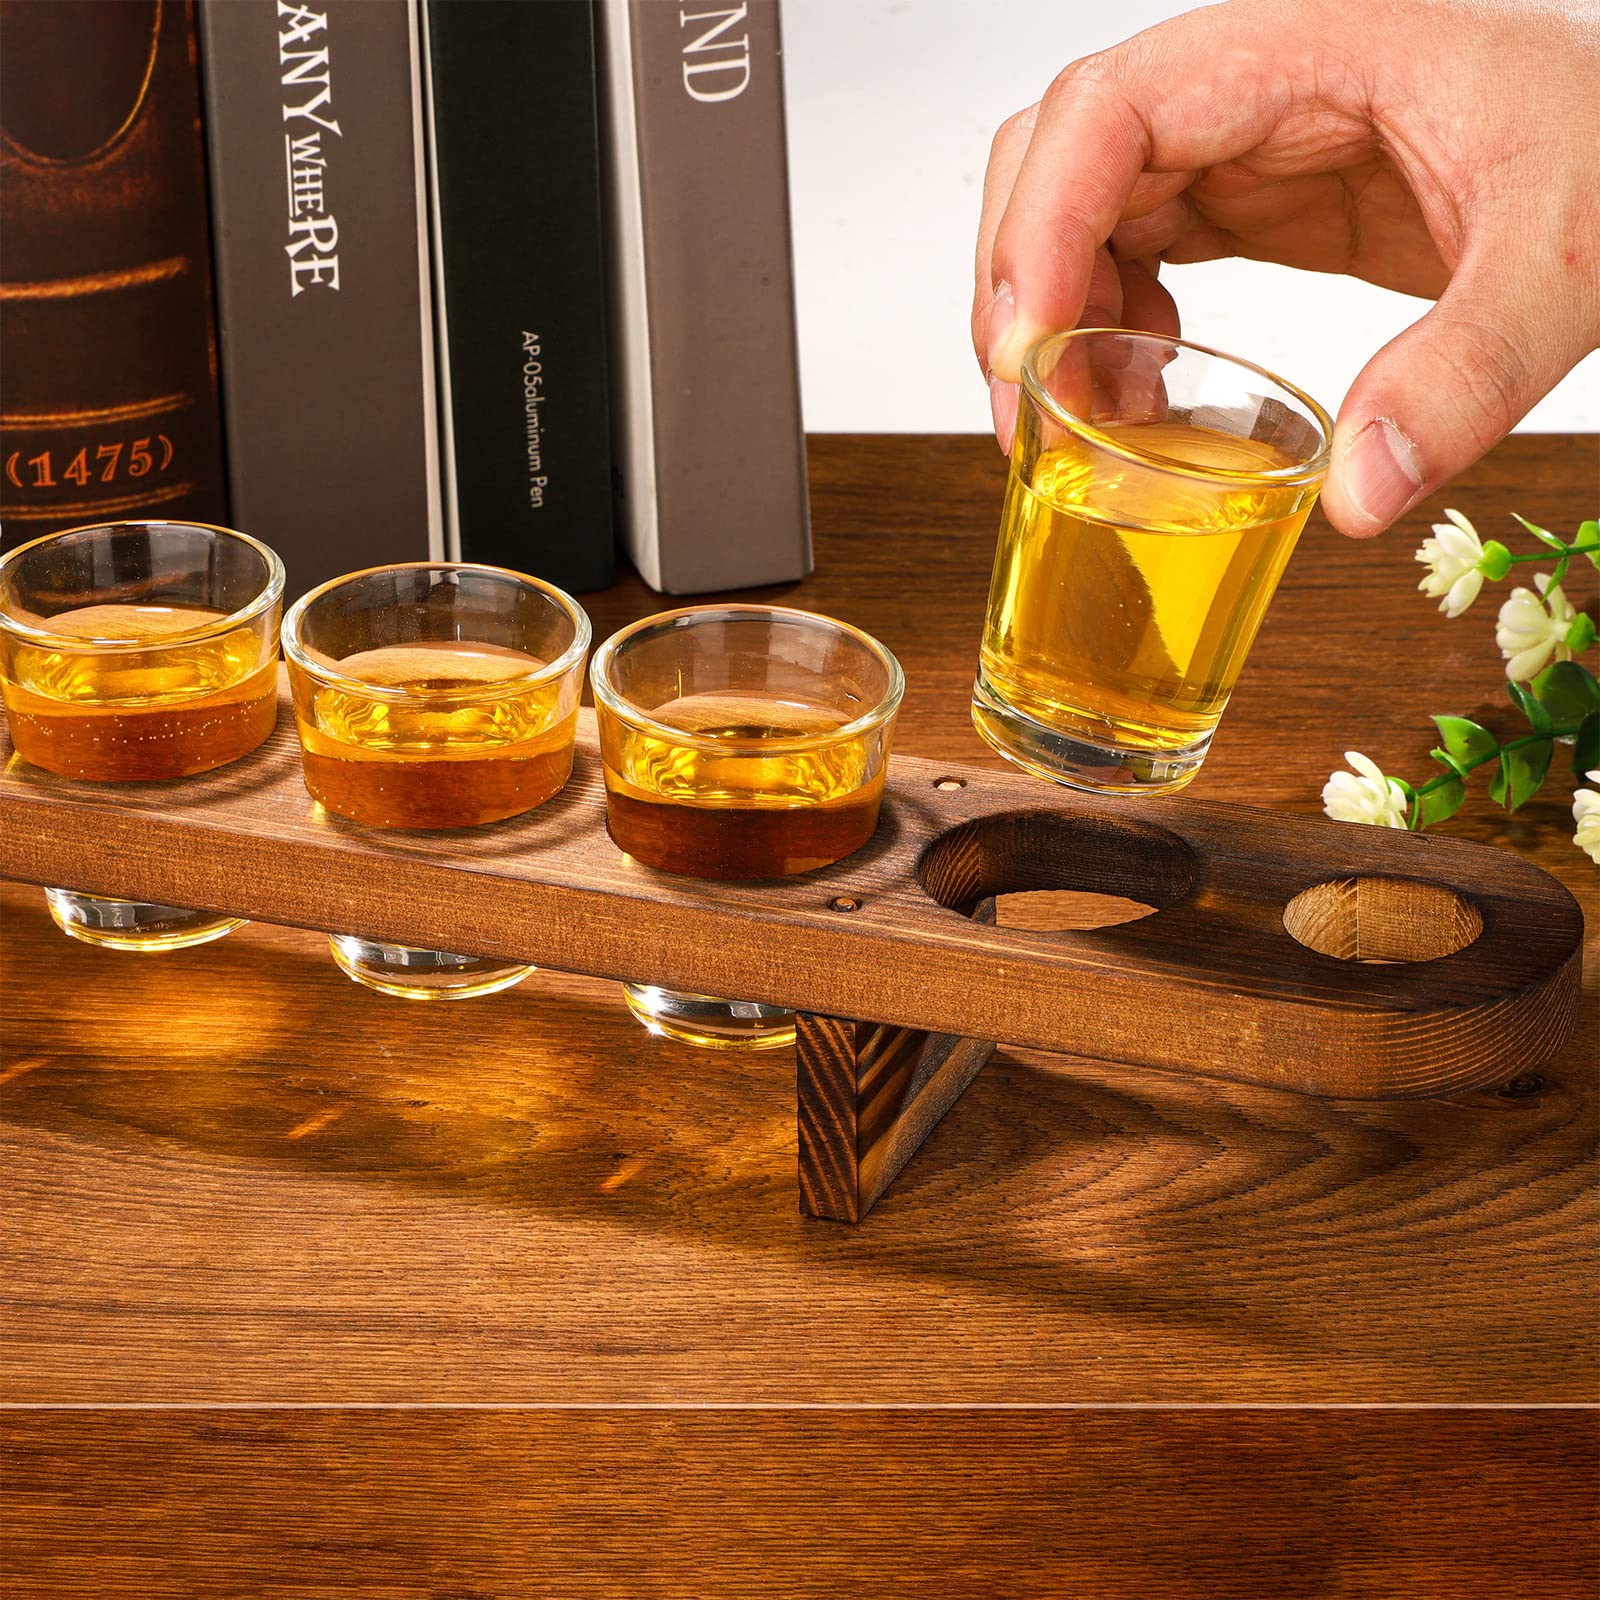 2 Pack Shot Glasses Serving Tray and Shot Glass Set Rustic Wooden Holder for Drinking Wood Shot Cup Tray Tequila Glass Set with Tray Whiskey Flight Board with Glasses for Party Restaurant Bar Display